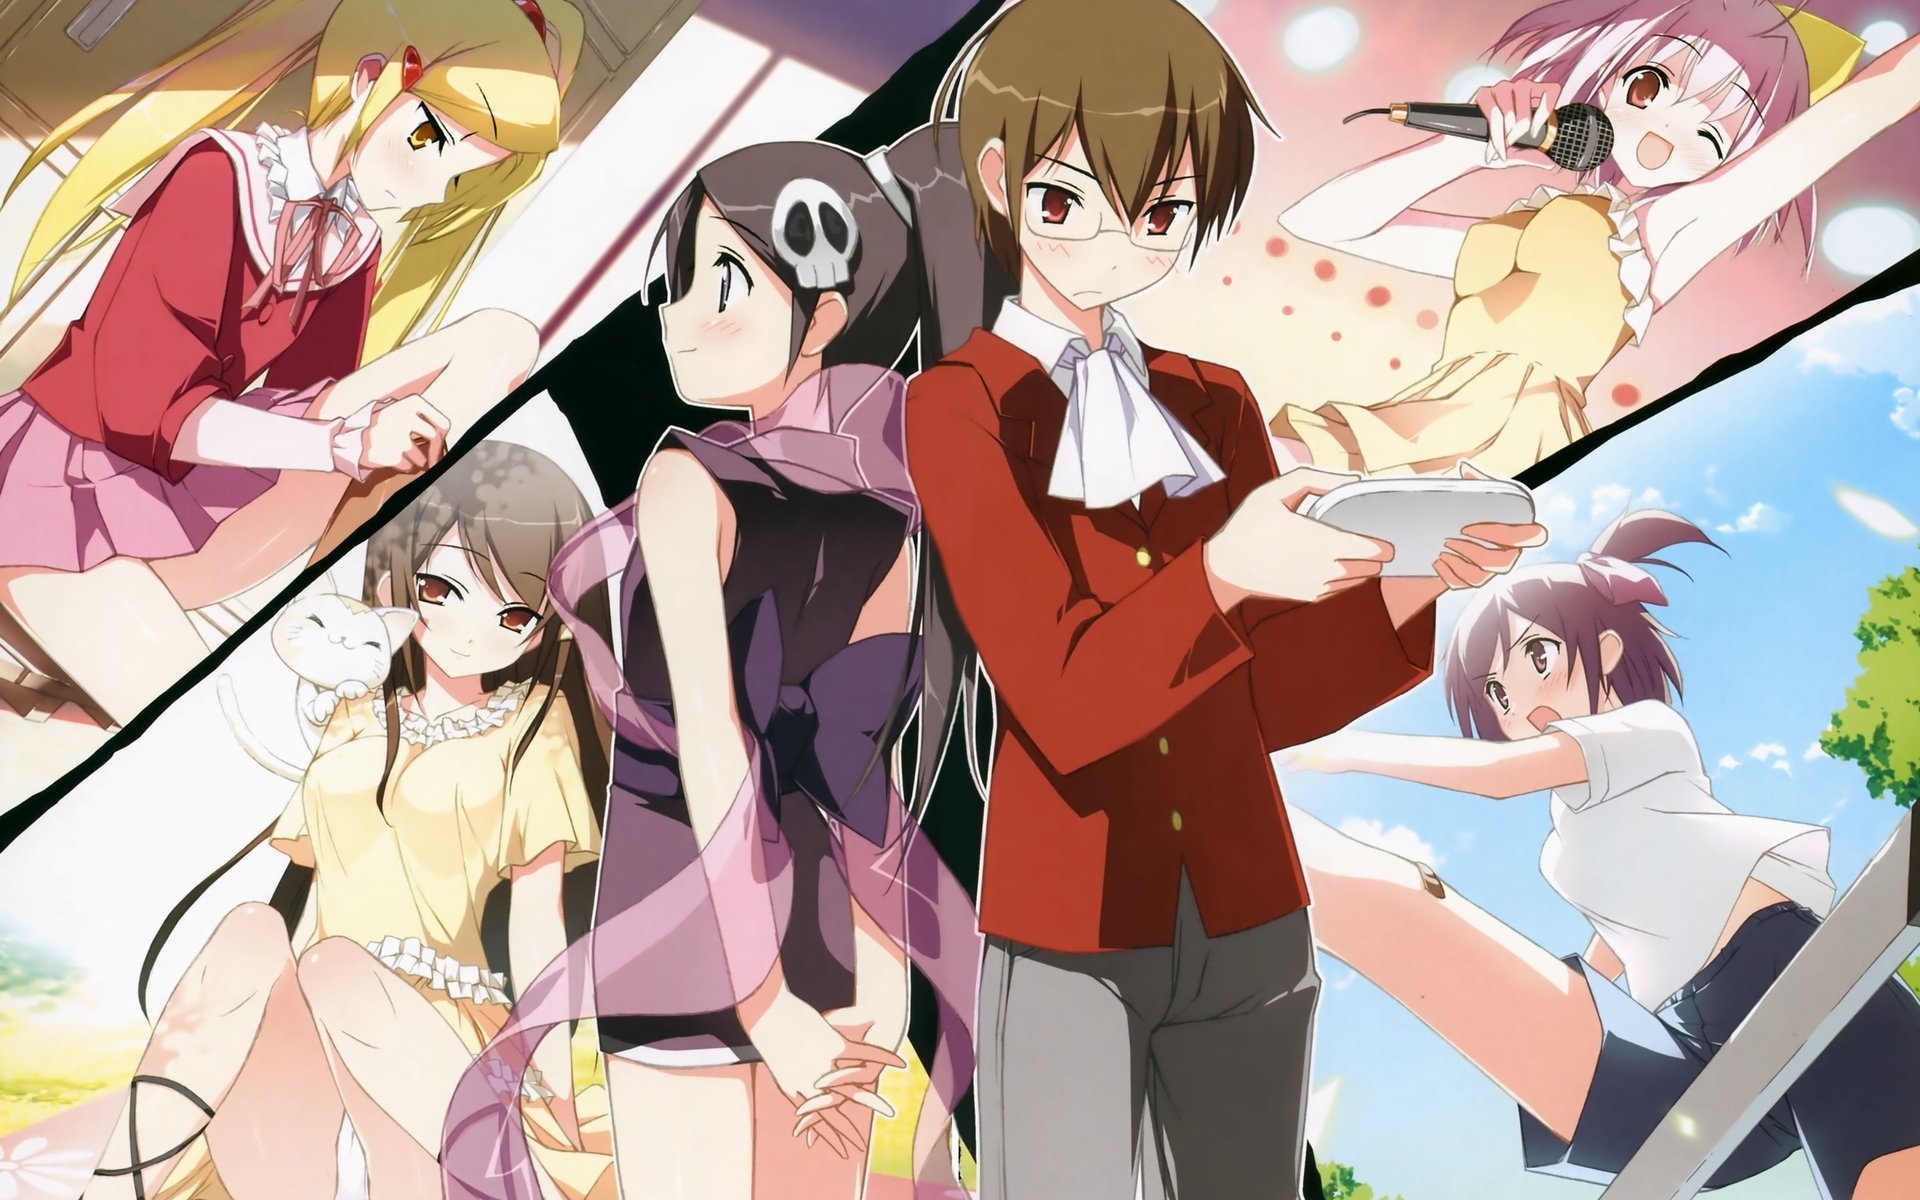 125 The World God Only Knows Hd Wallpapers Background Images Images, Photos, Reviews